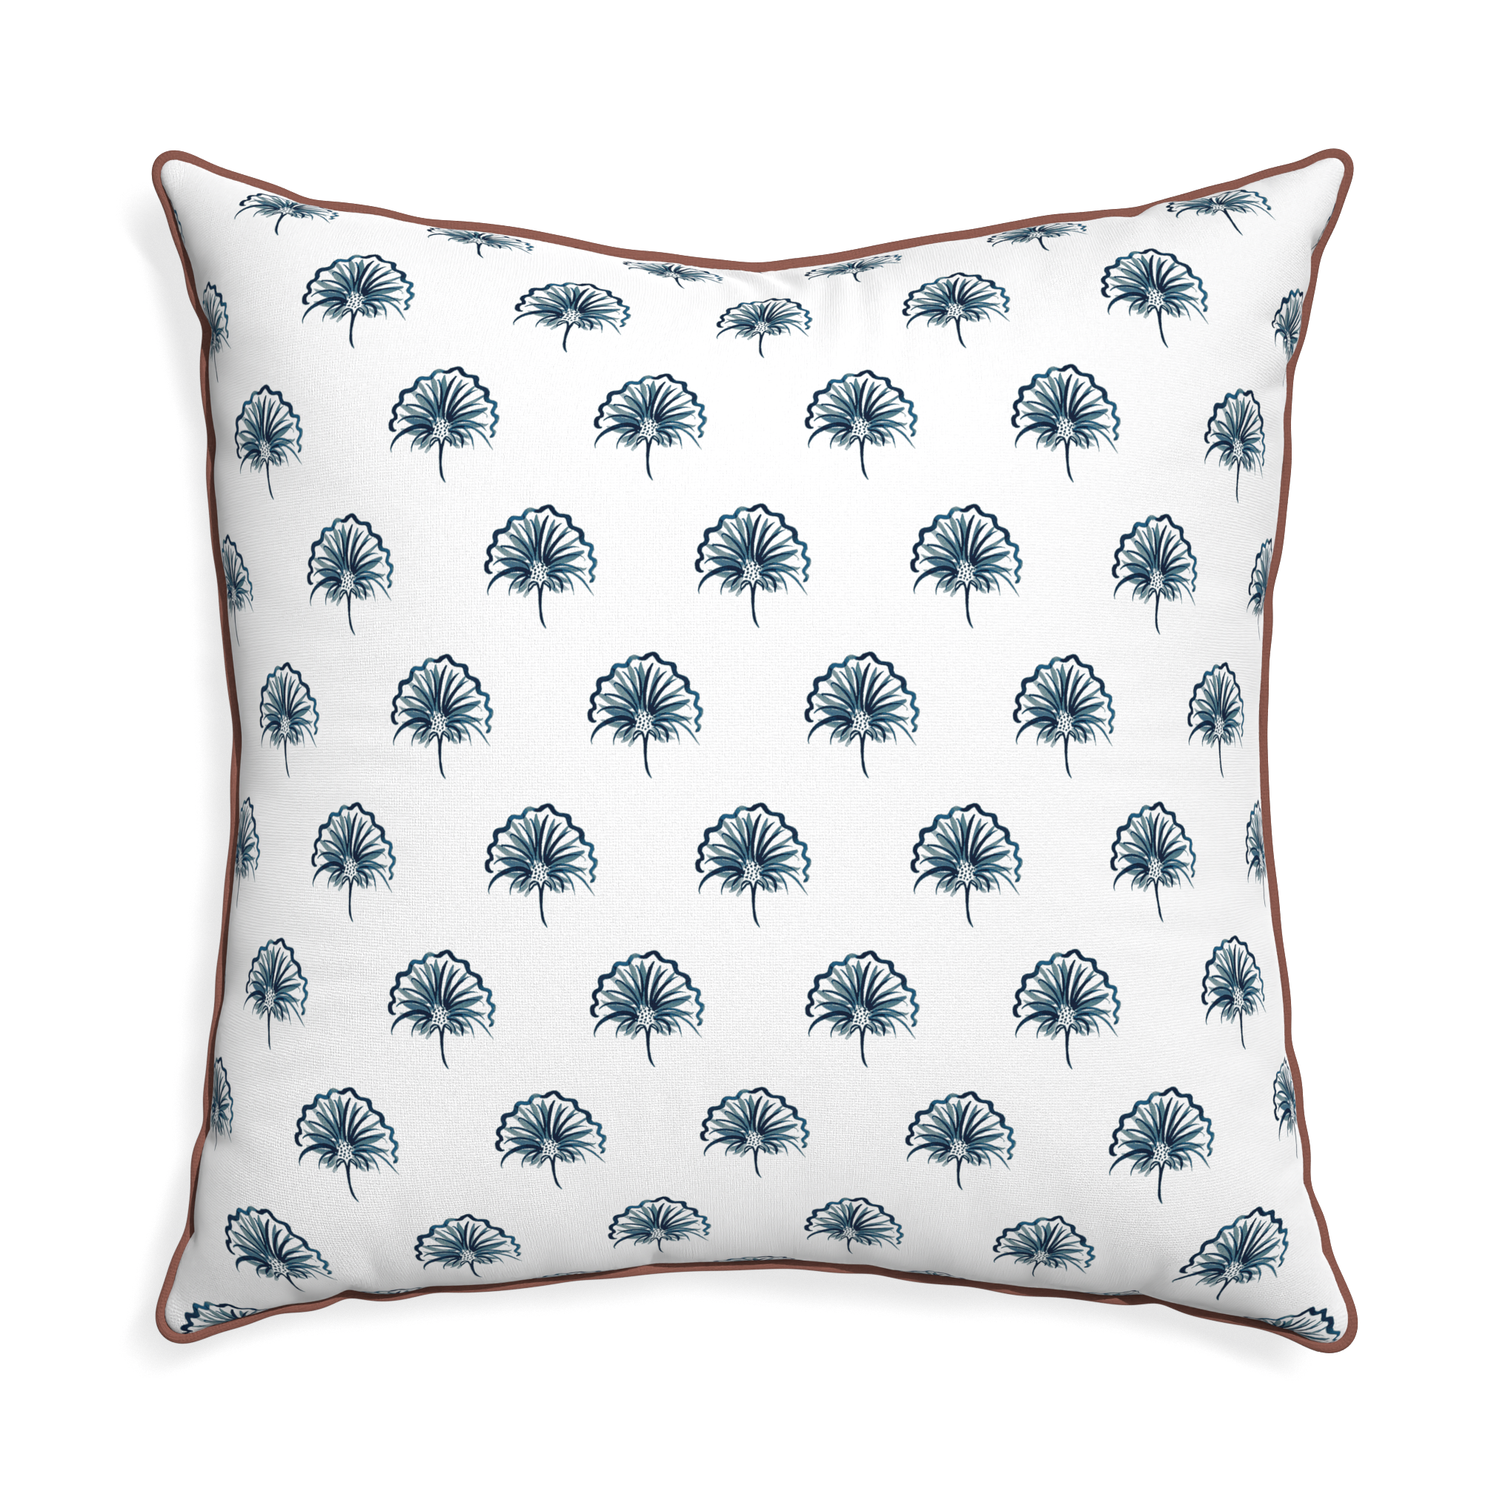 Euro-sham penelope midnight custom floral navypillow with w piping on white background